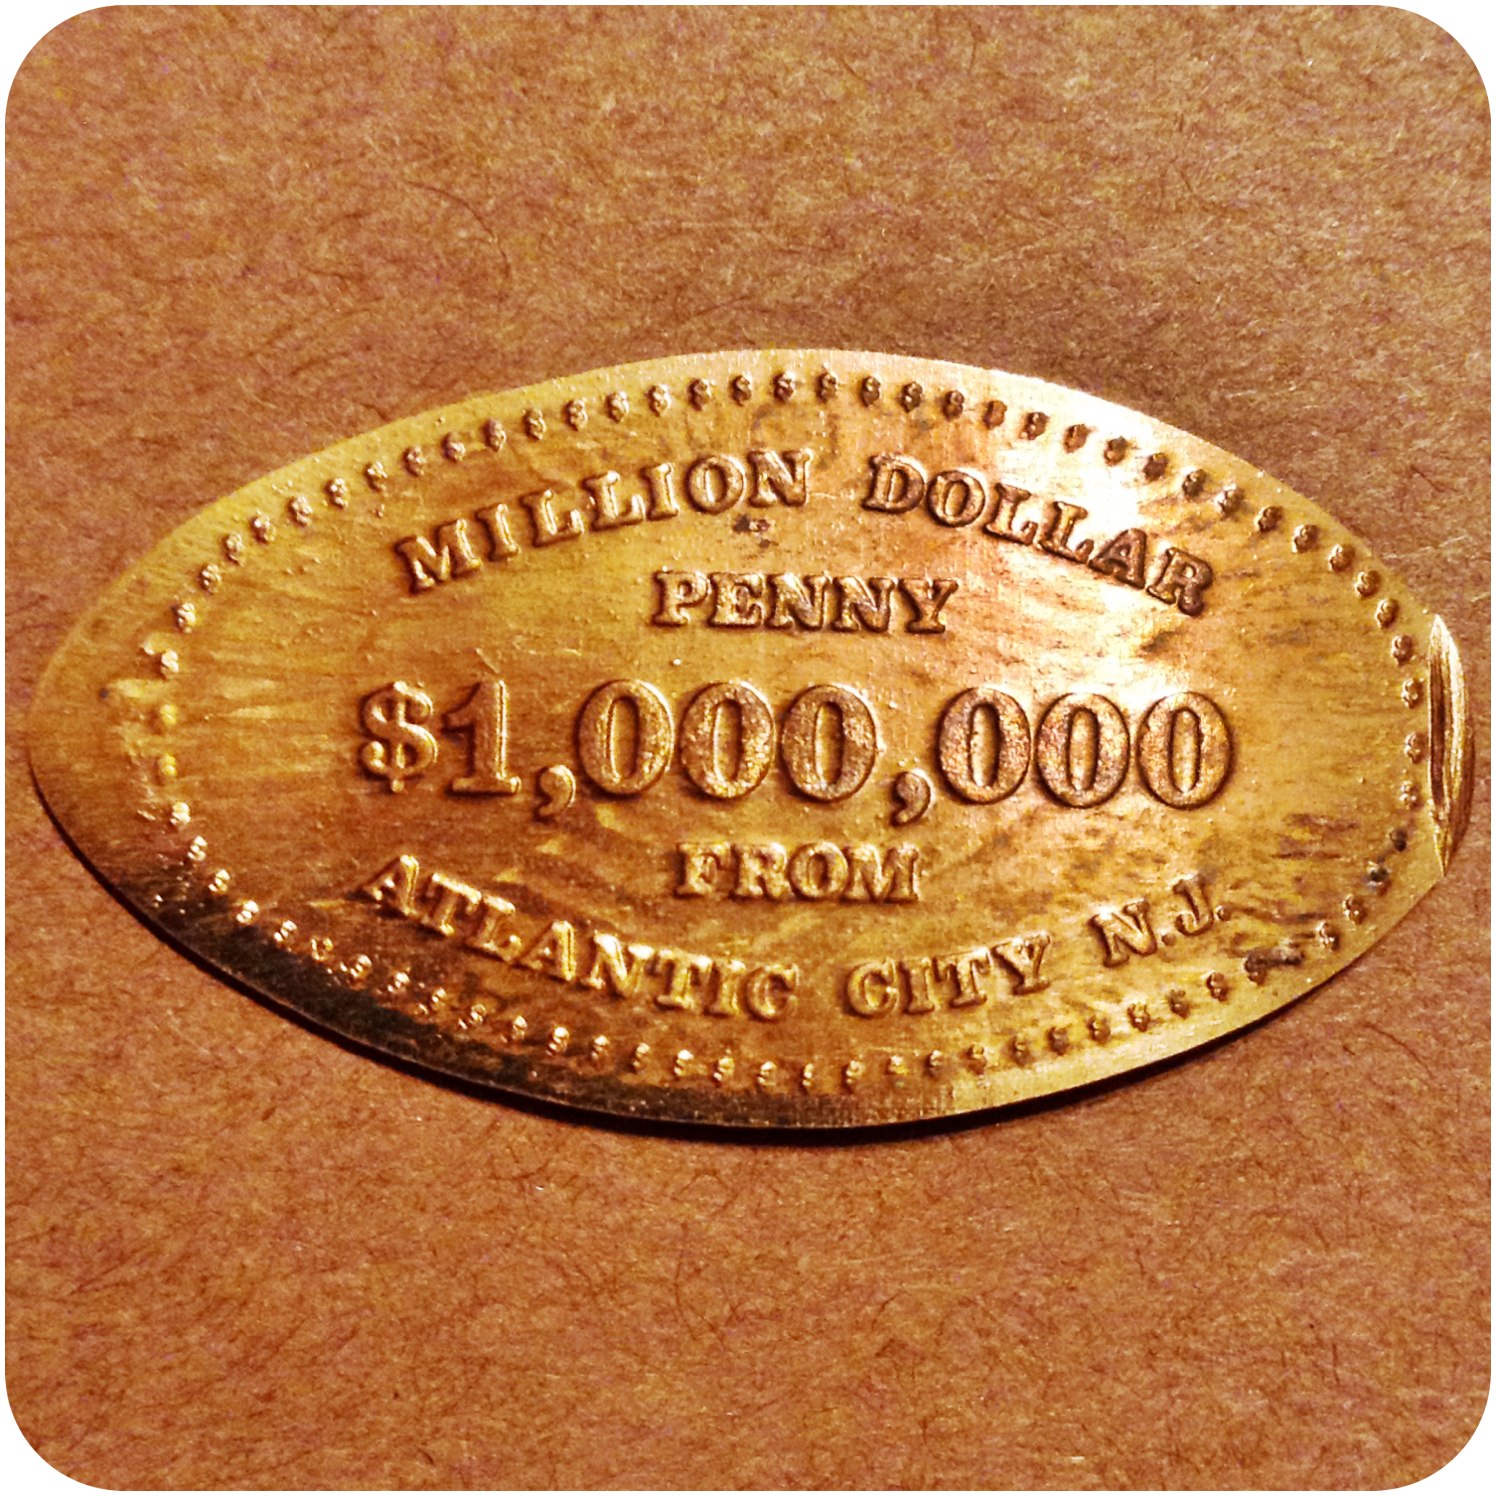 Million Dollar Penny - $1,000,000 from Atlantic City, N.J. Elongated Copper Coin